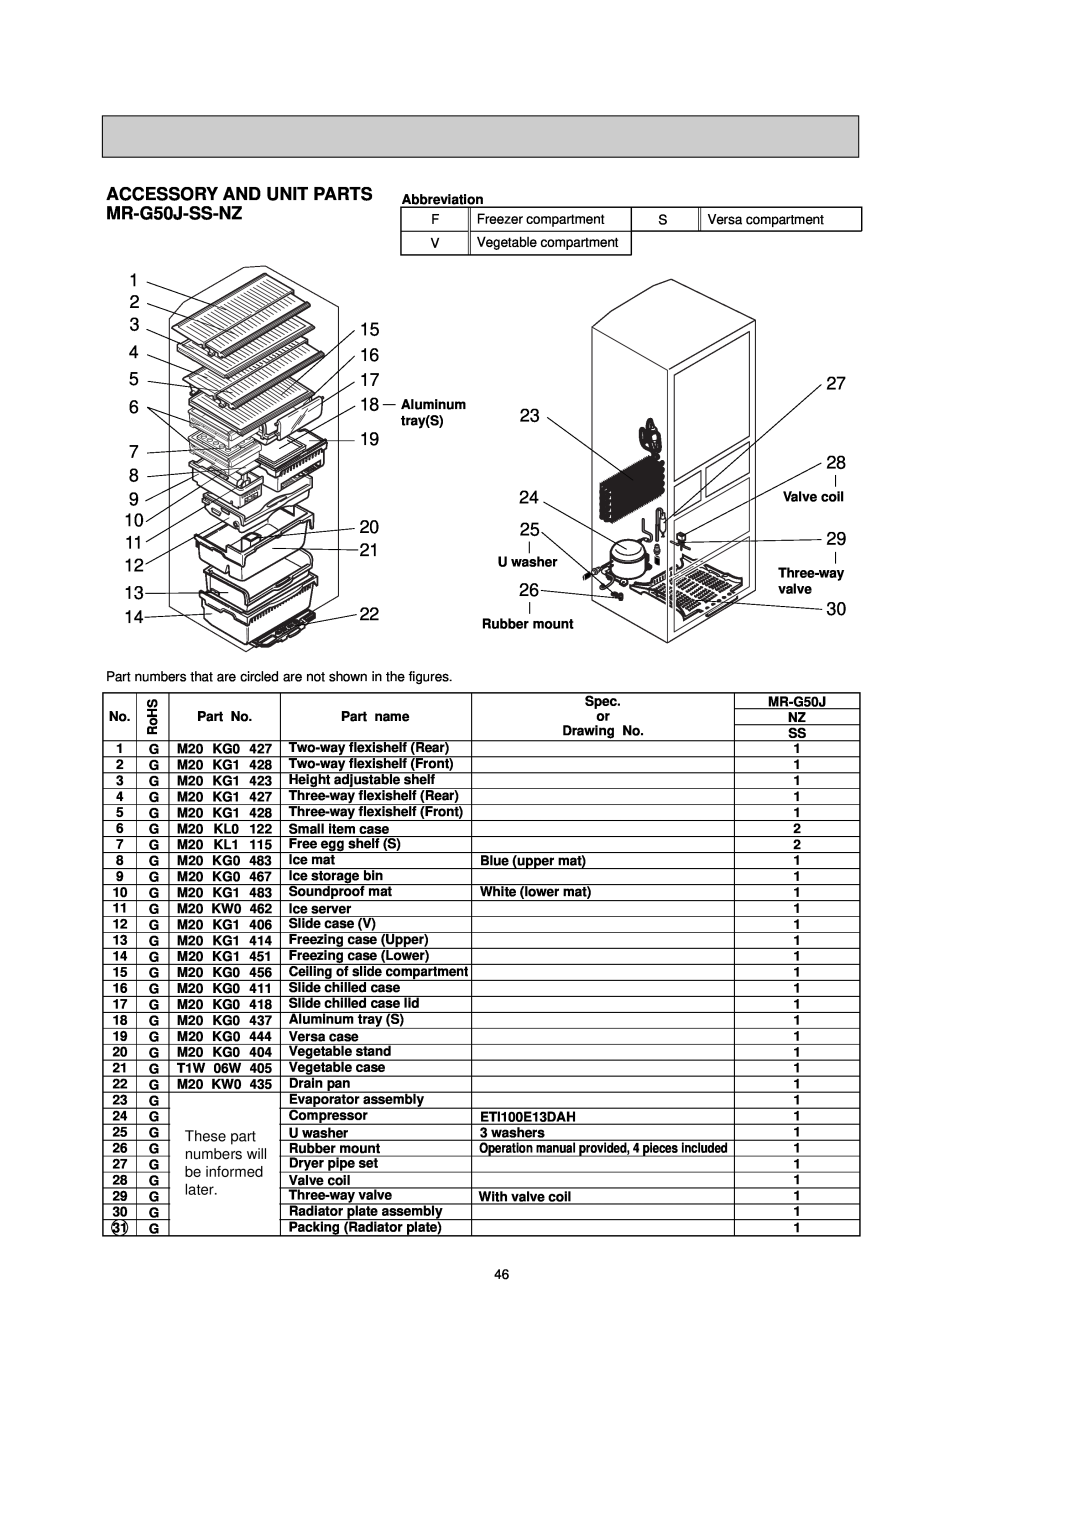 Mitsubishi Electronics manual ACCESSORY AND UNIT PARTS MR-G50J-SS-NZ, 1121, These part, numbers will, be informed, later 